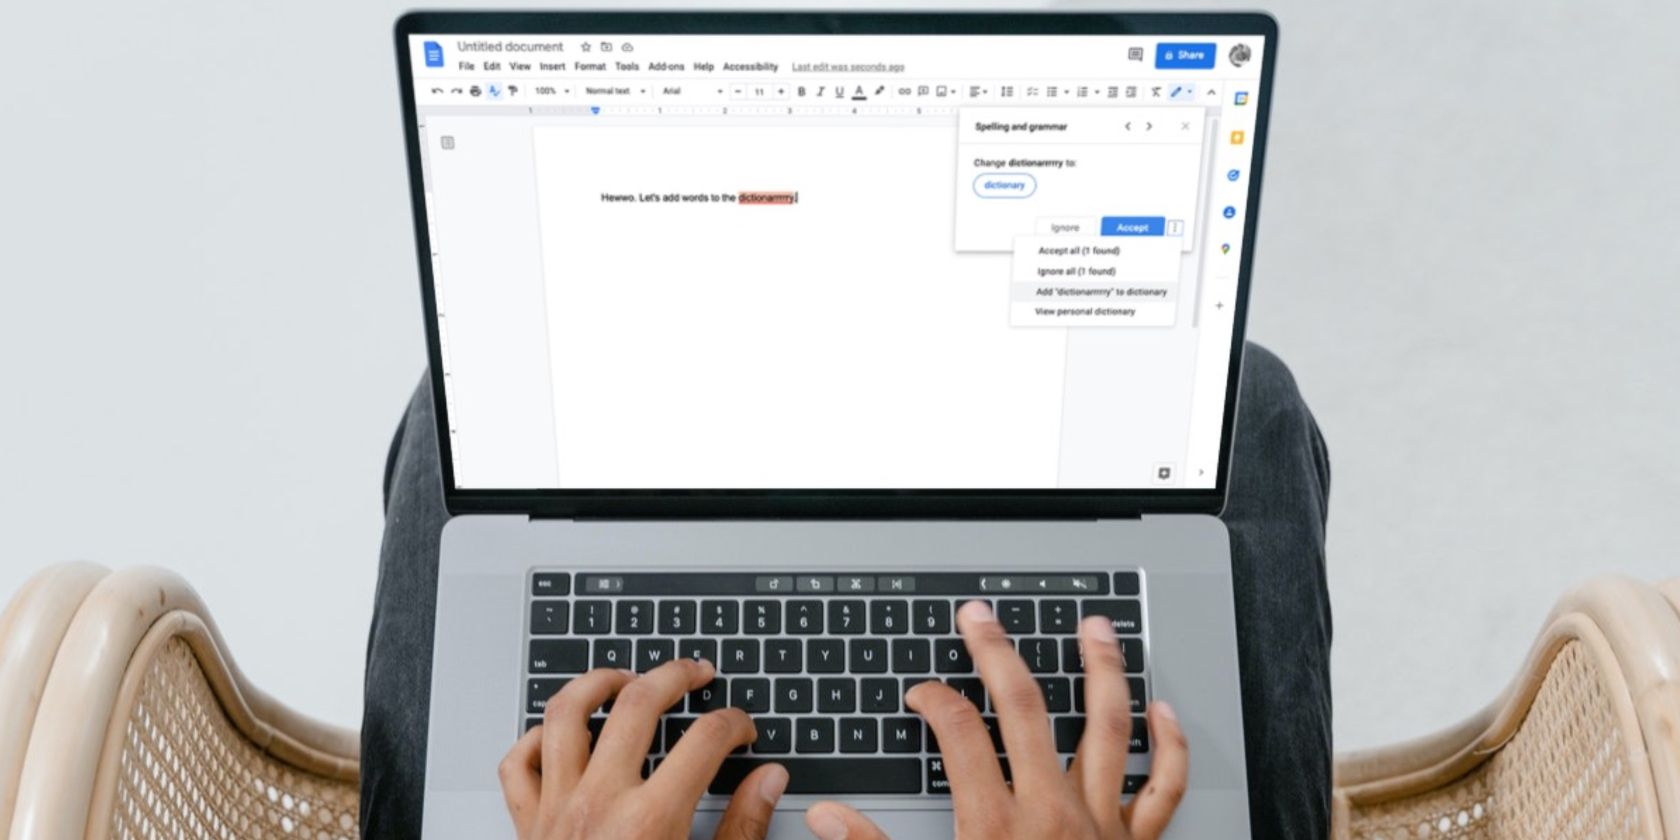 Image shows a man typing on a laptop using Google Docs 